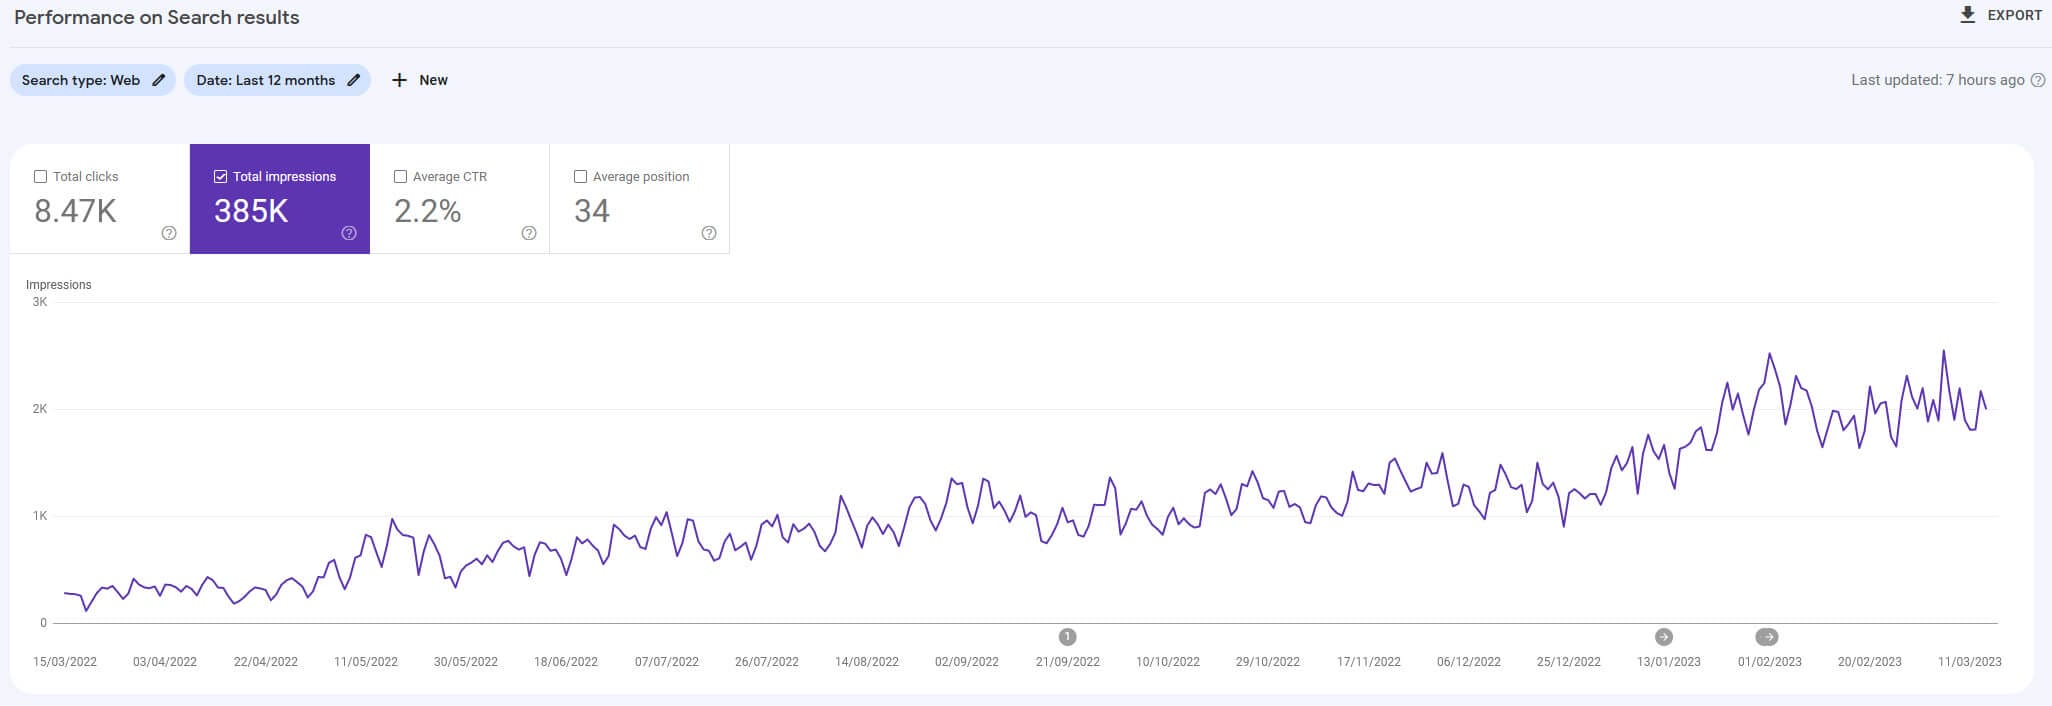 Performance on Search results impressions